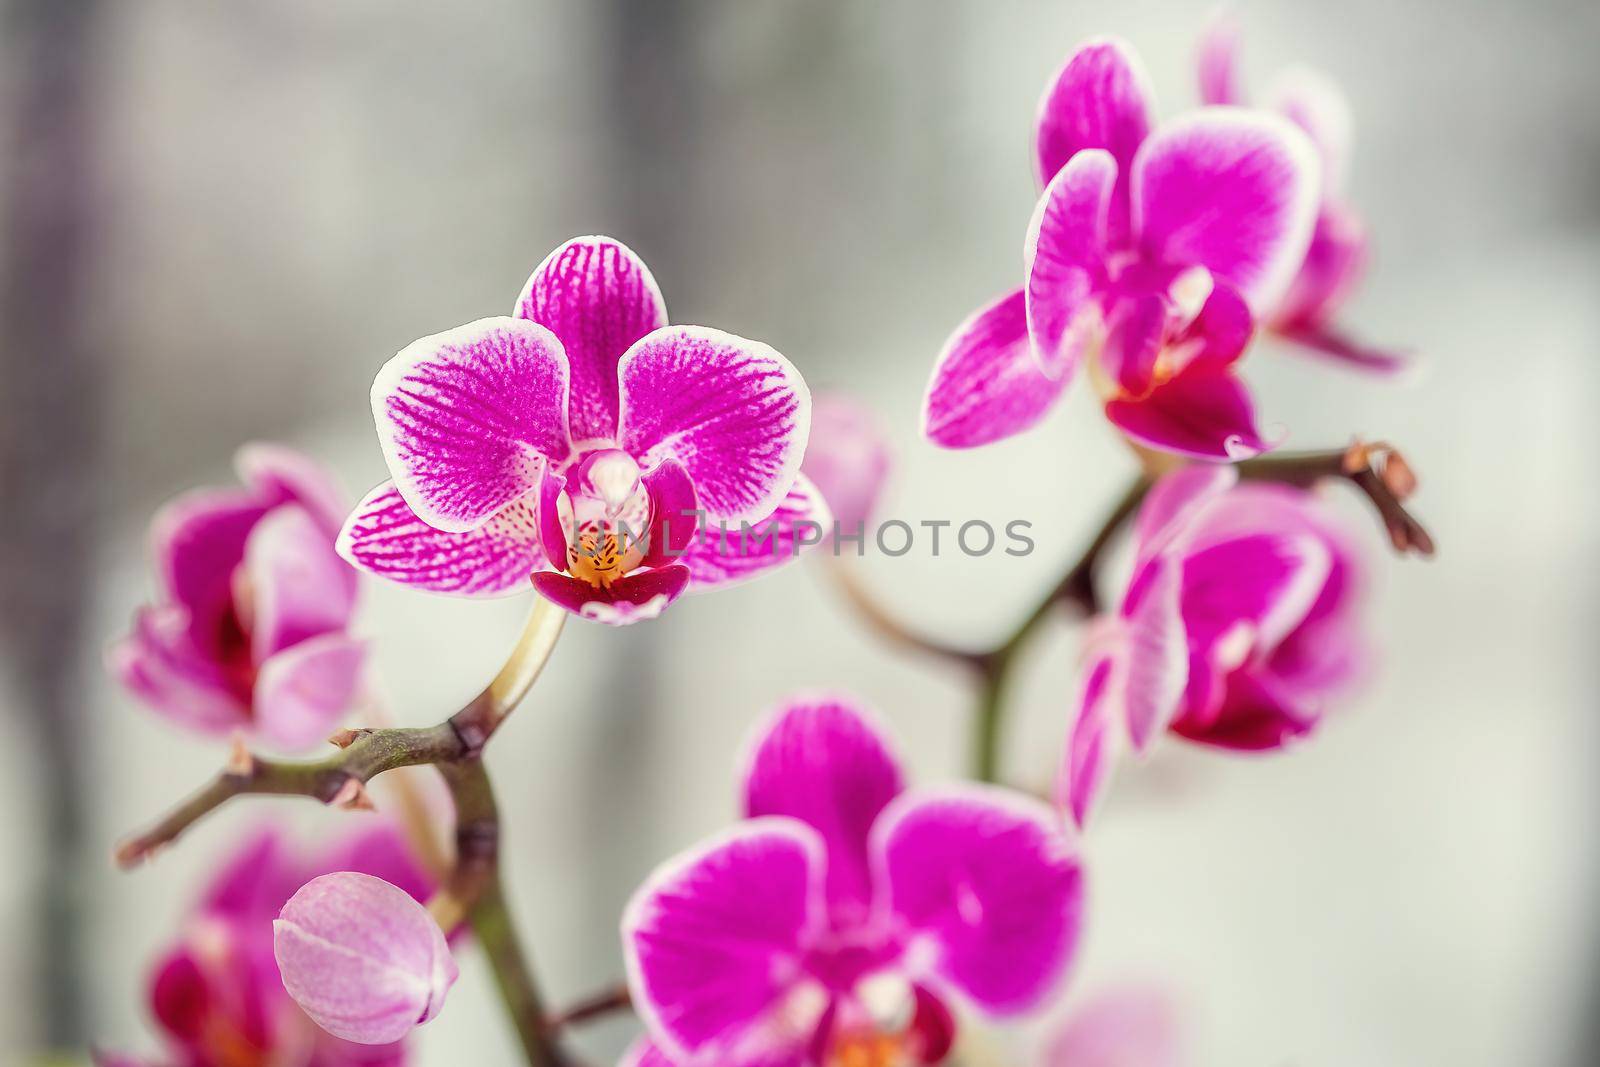 Violet Phalaenopsis orchid flowers are photographed in front of a window in natural light